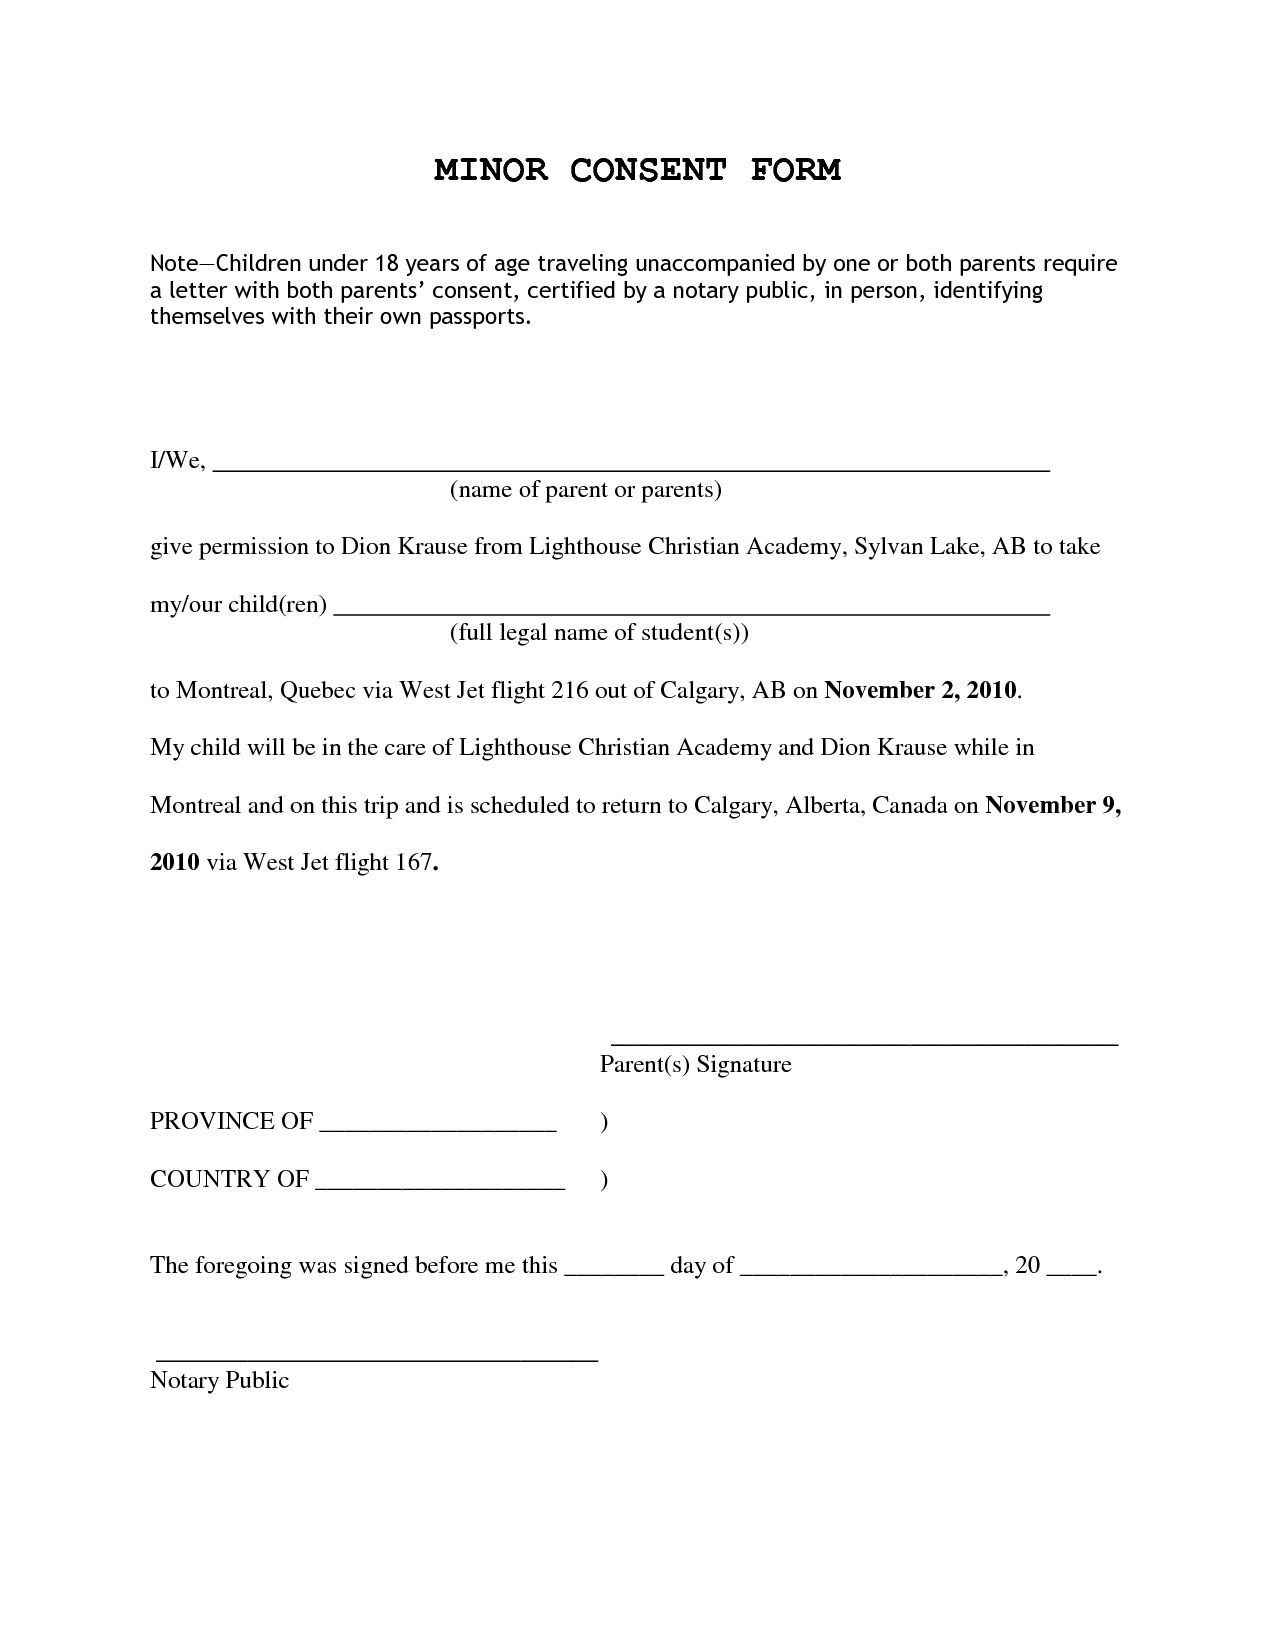 Consent Permission Inside Letter For Children Travelling Inside Fit To Fly Certificate Template